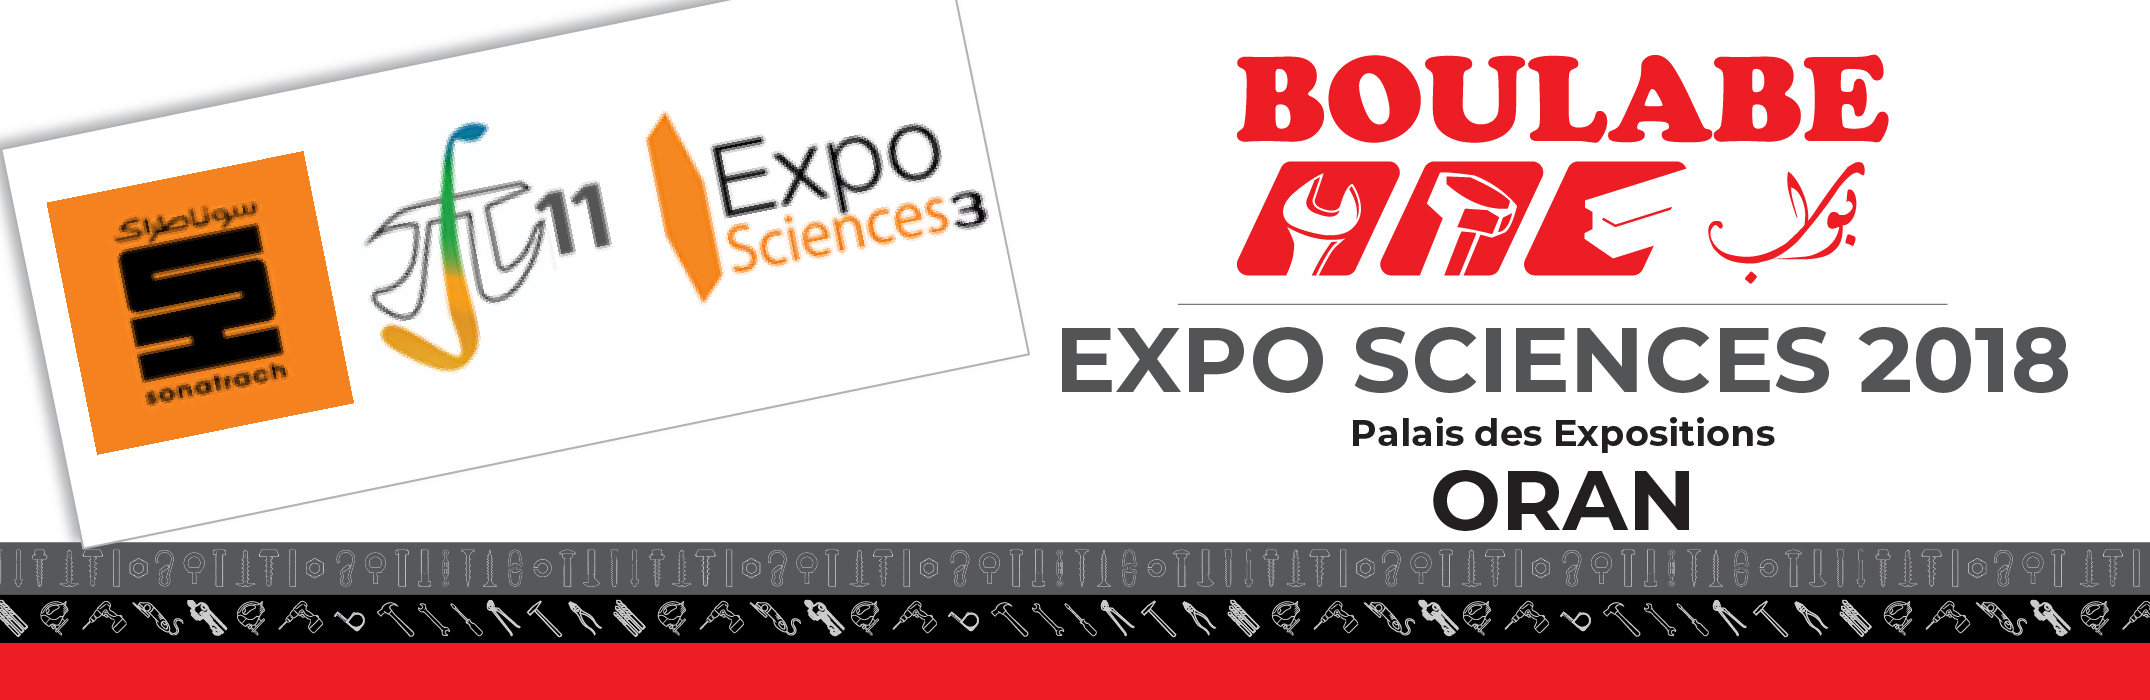 EXPO SCIENCE 2018